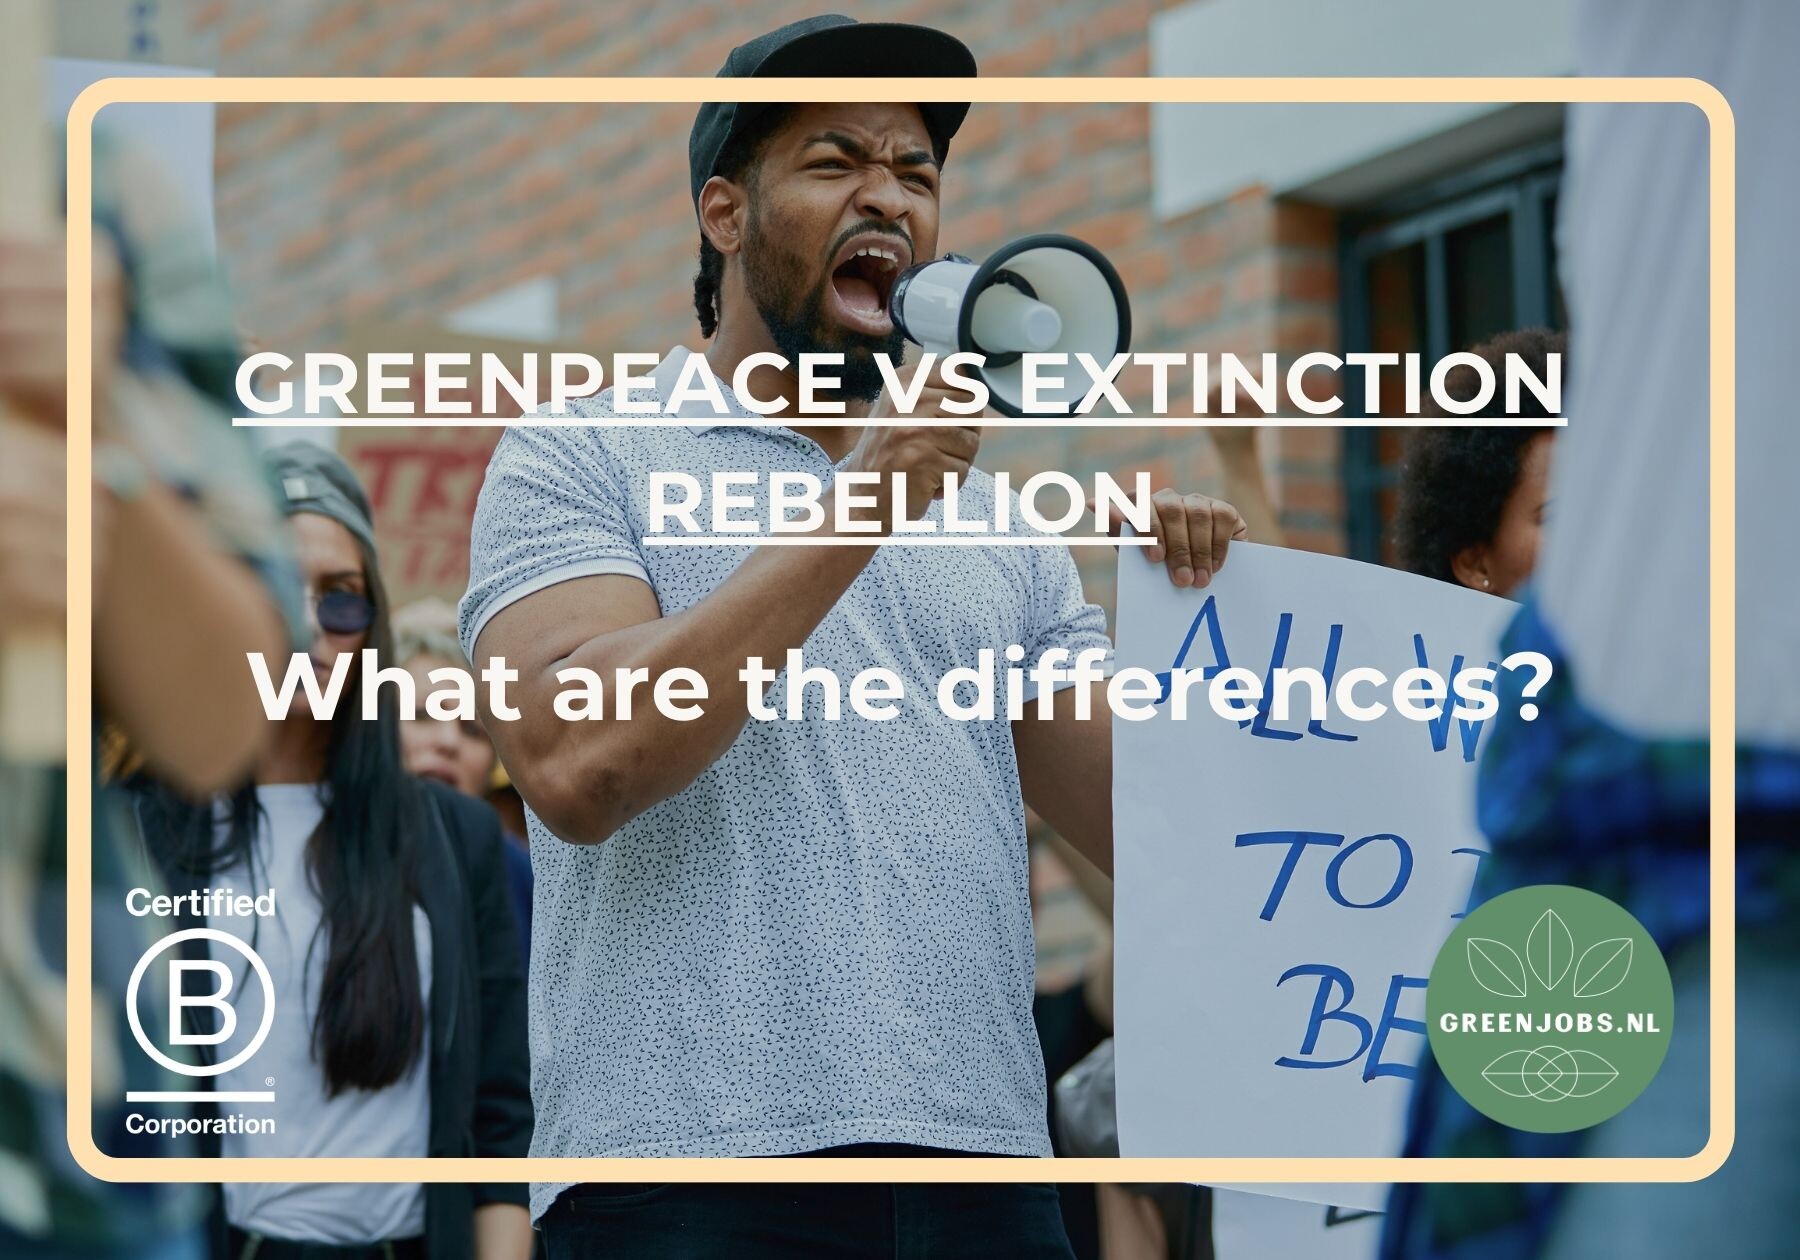 Greenpeace vs Extinction Rebellion - What are the differences?